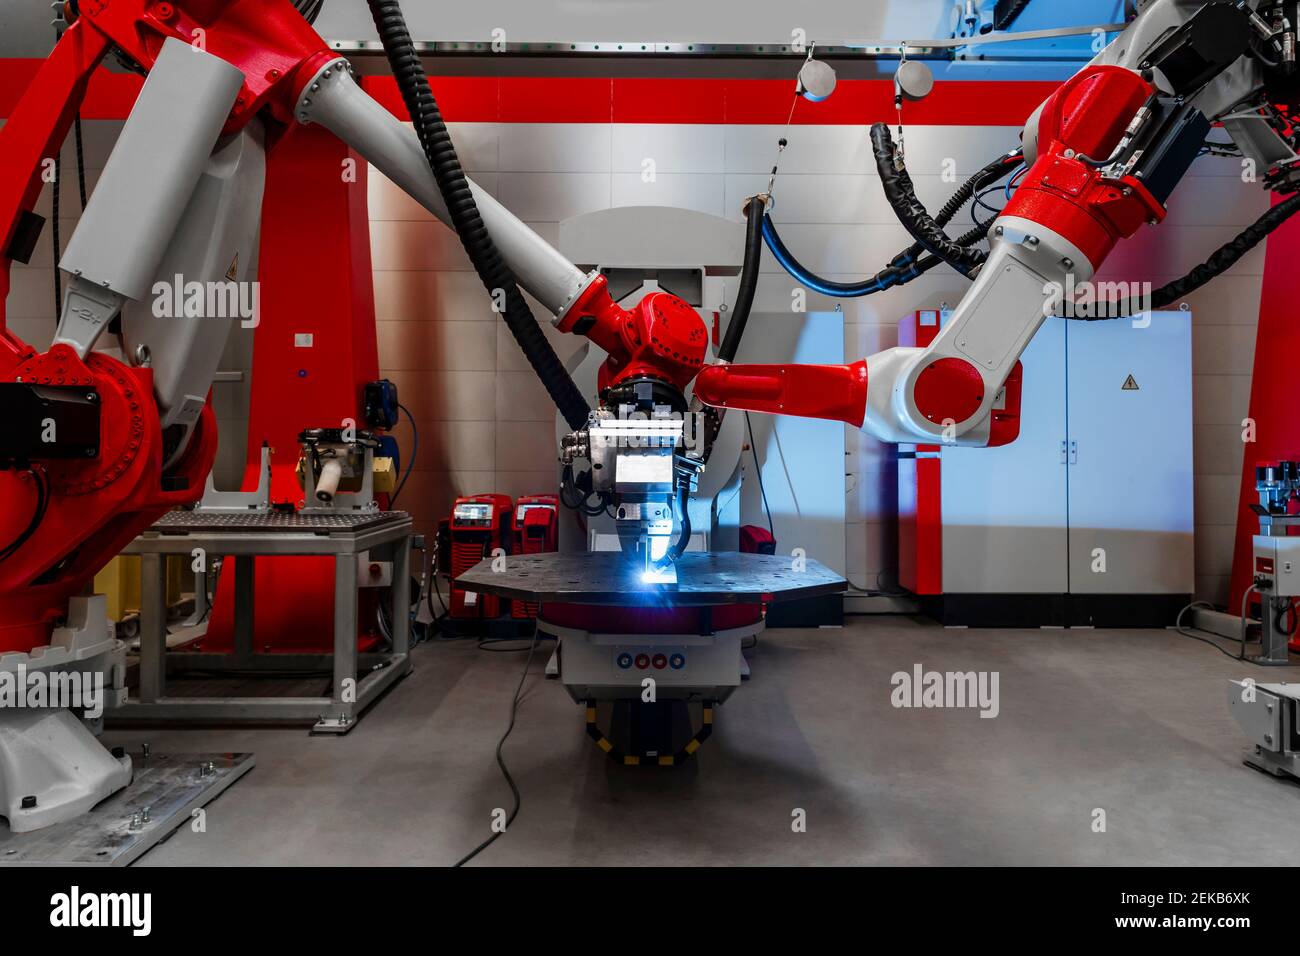 Automatic robots welding metal in factory Stock Photo